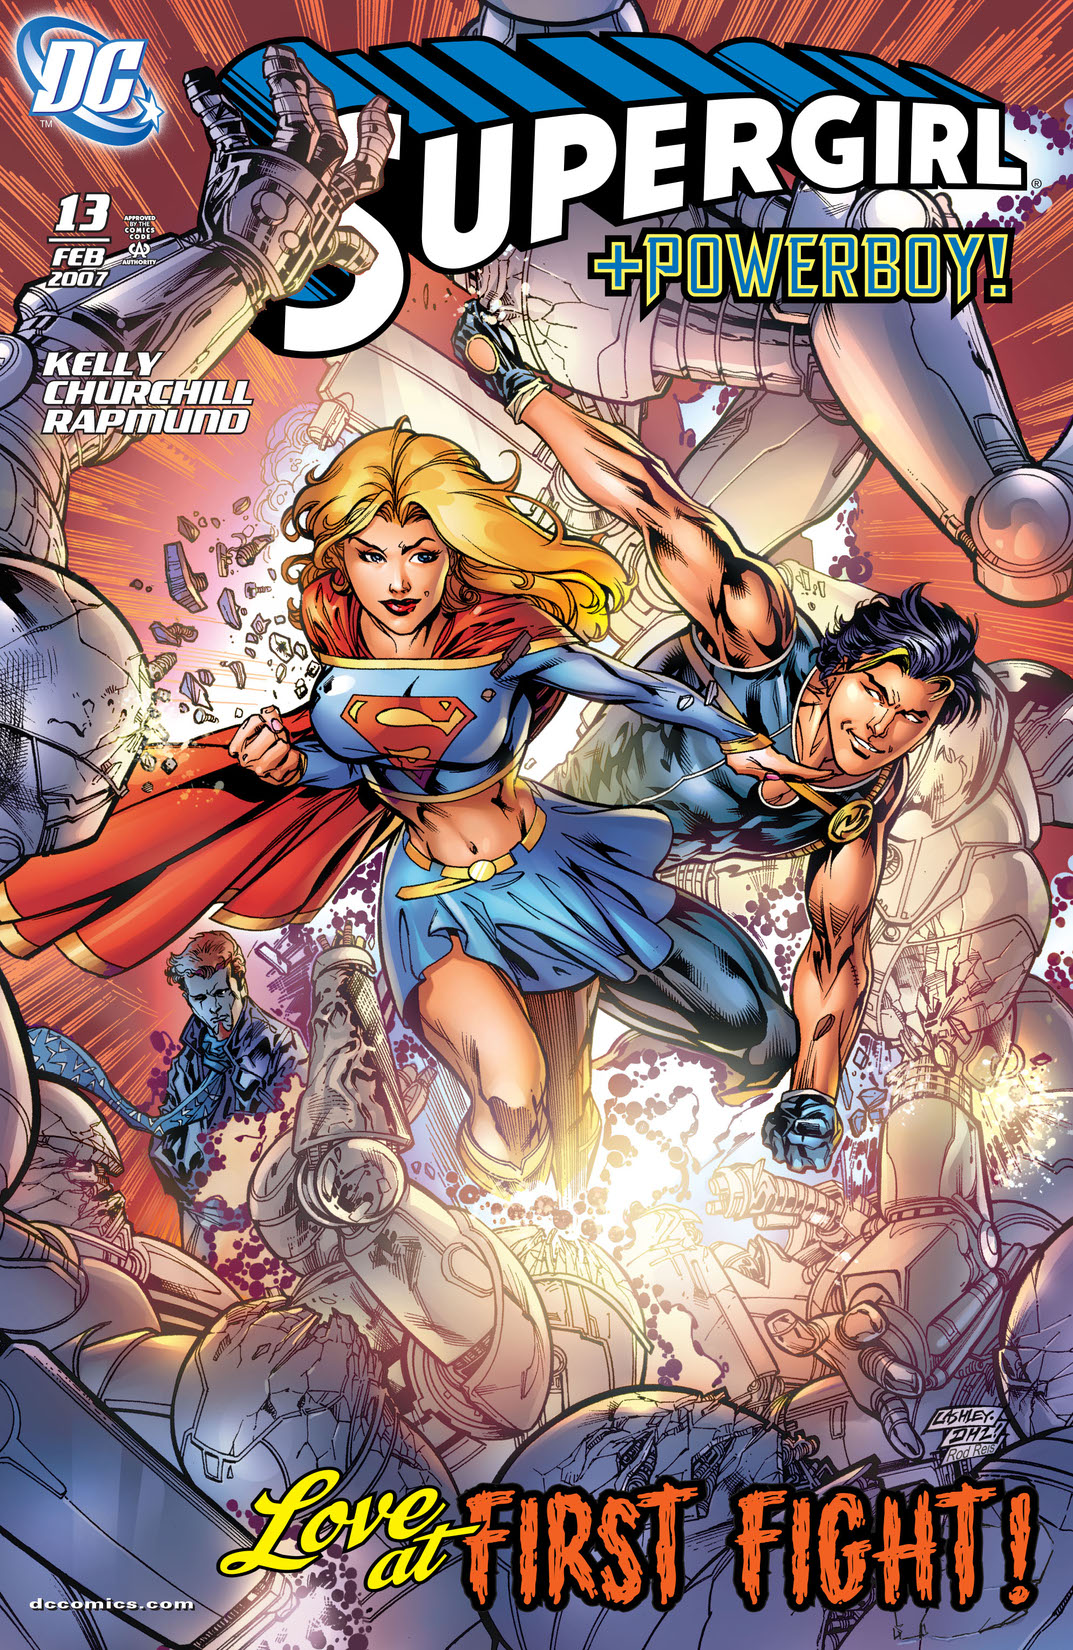 Supergirl (2005-) #13 preview images